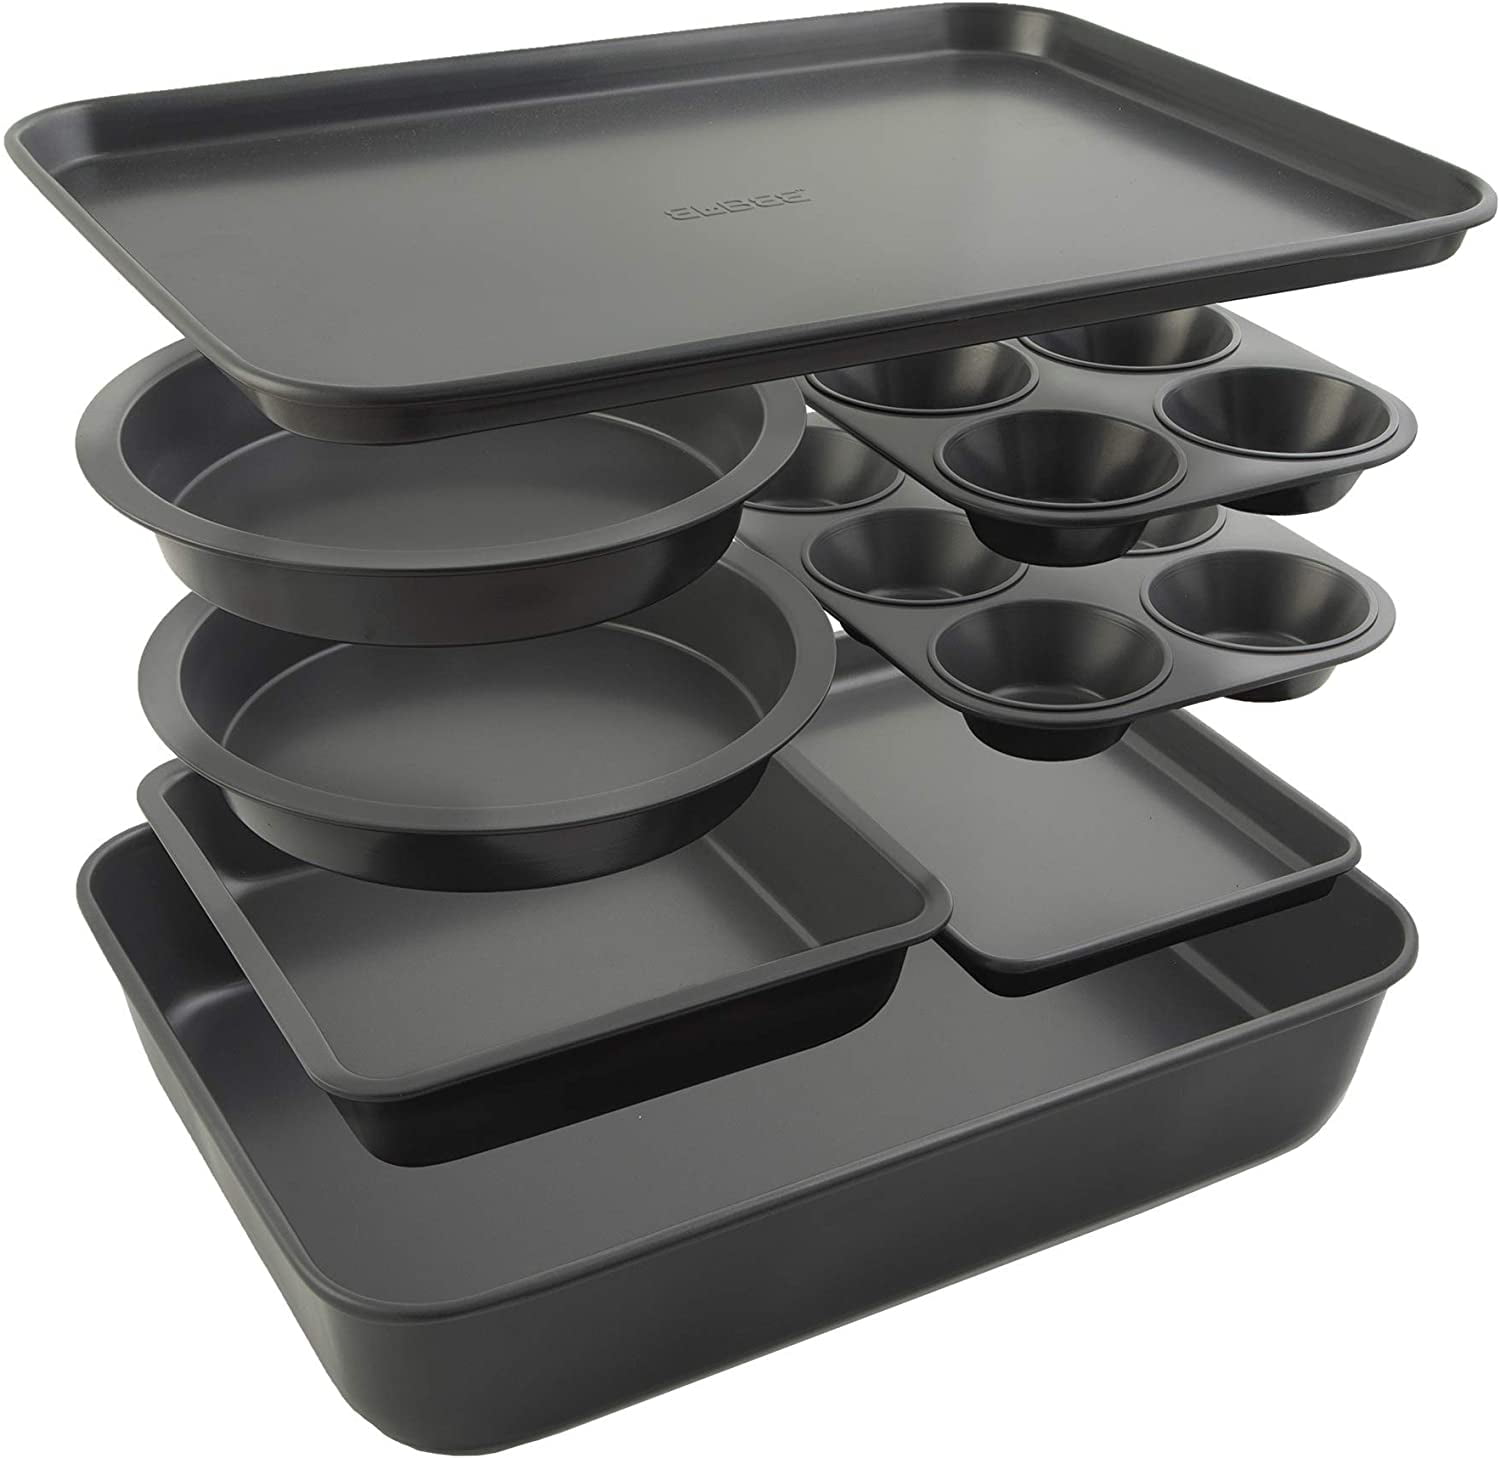 Bakeware Set Non Stick Baking Trays Oven Sheets Roasting US carbon steel T7L0 